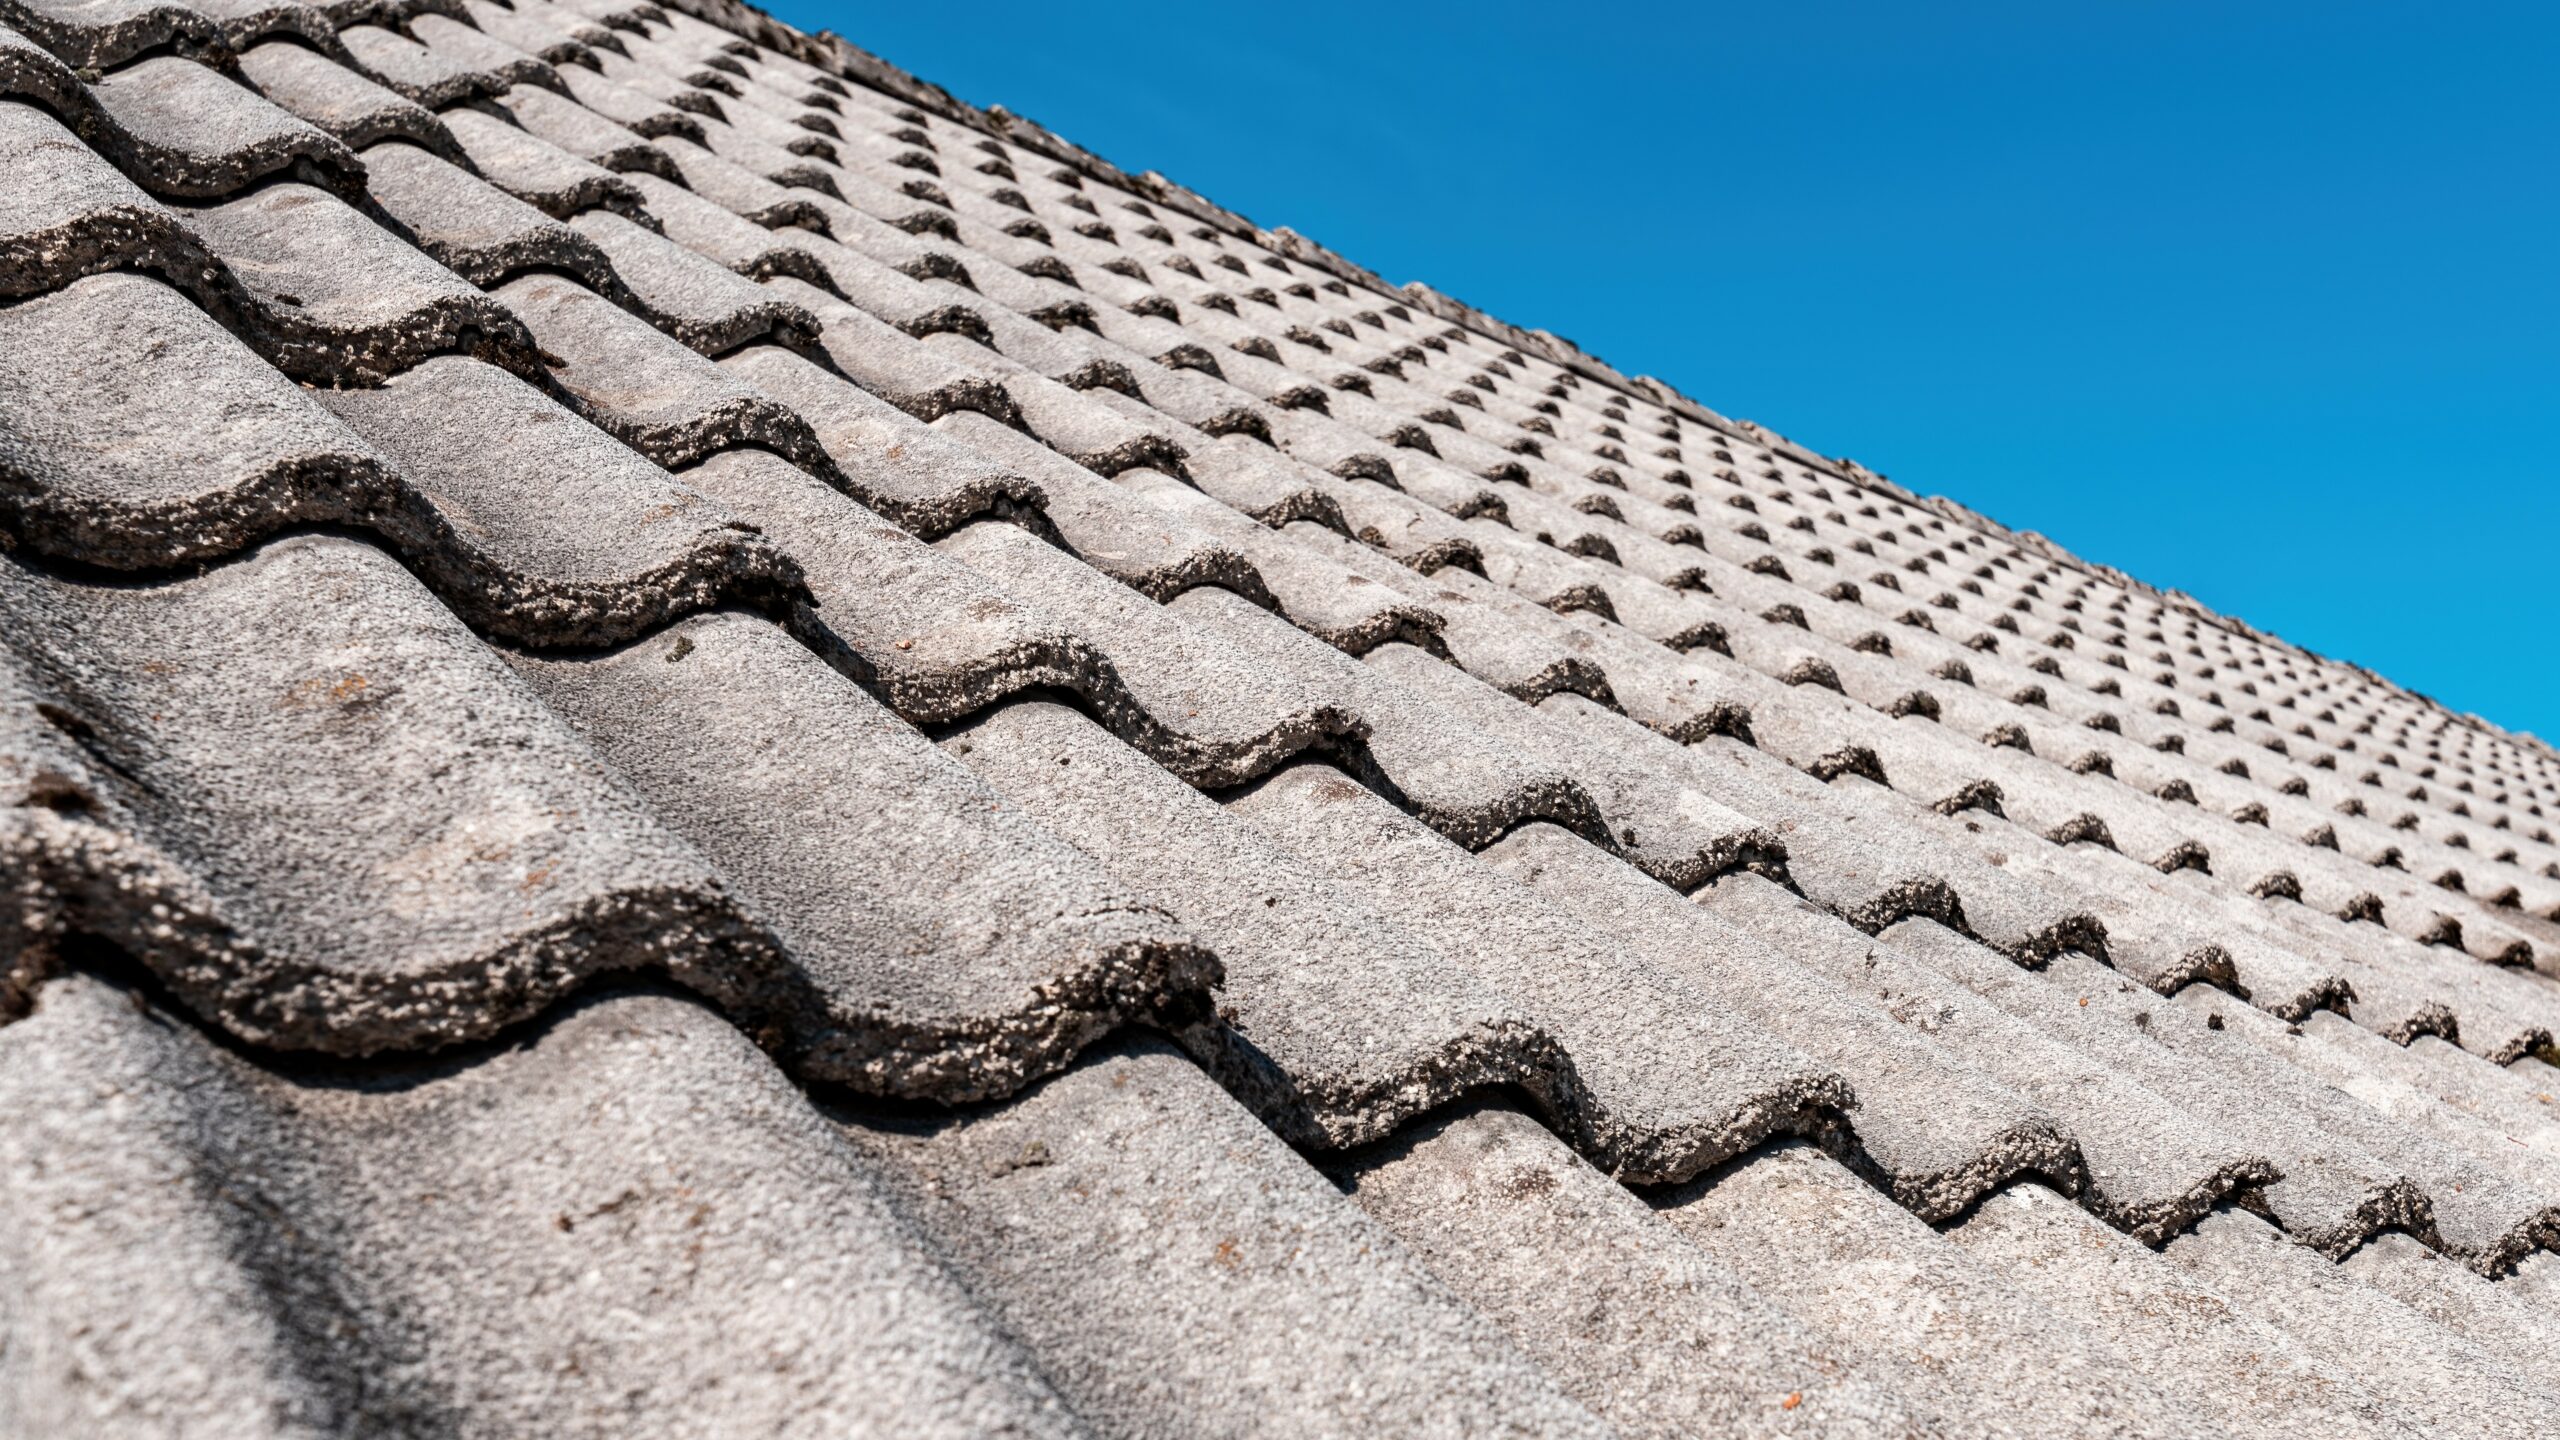 Concrete roof tiles of a house